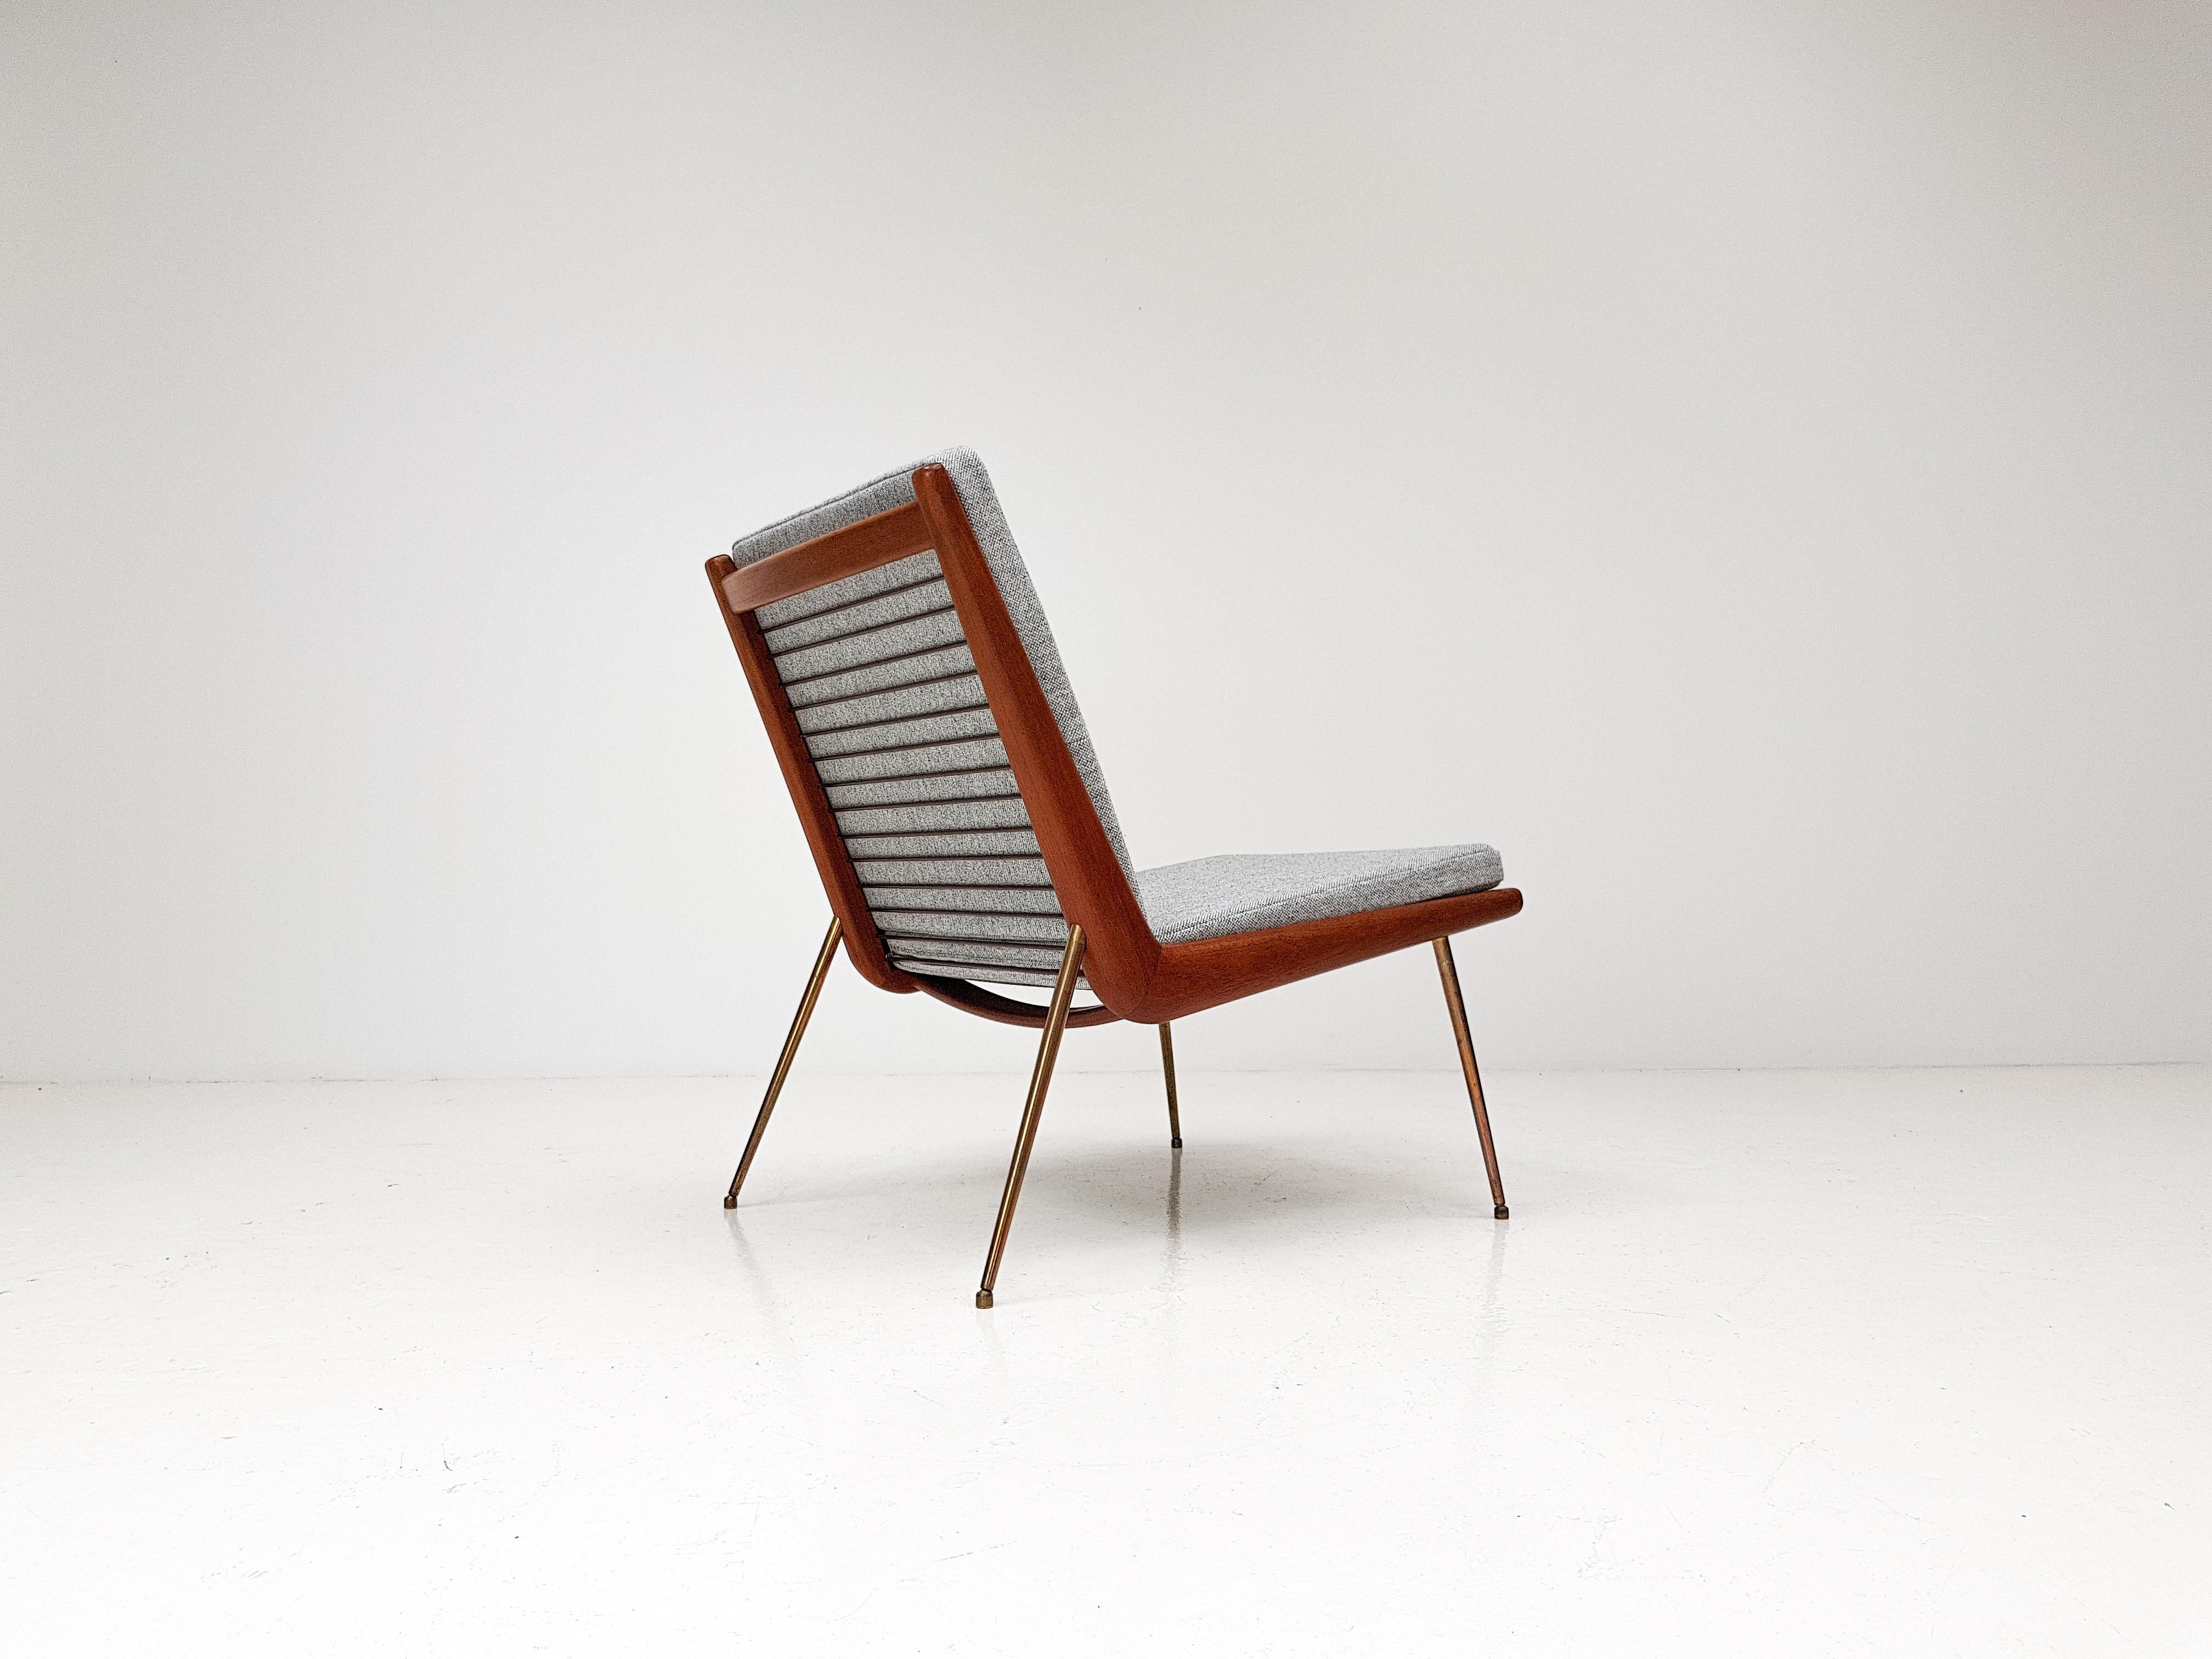 A Peter Hvidt & Orla Molgaard-Nielsen designed FD-159 'Boomerang' lounge chair for France & Son, Denmark, 1950s.  THE MODEL FEATURING ARMS

The chair has a boomerang-shaped frame in teak from which its name derives, brass legs, new cushions and new